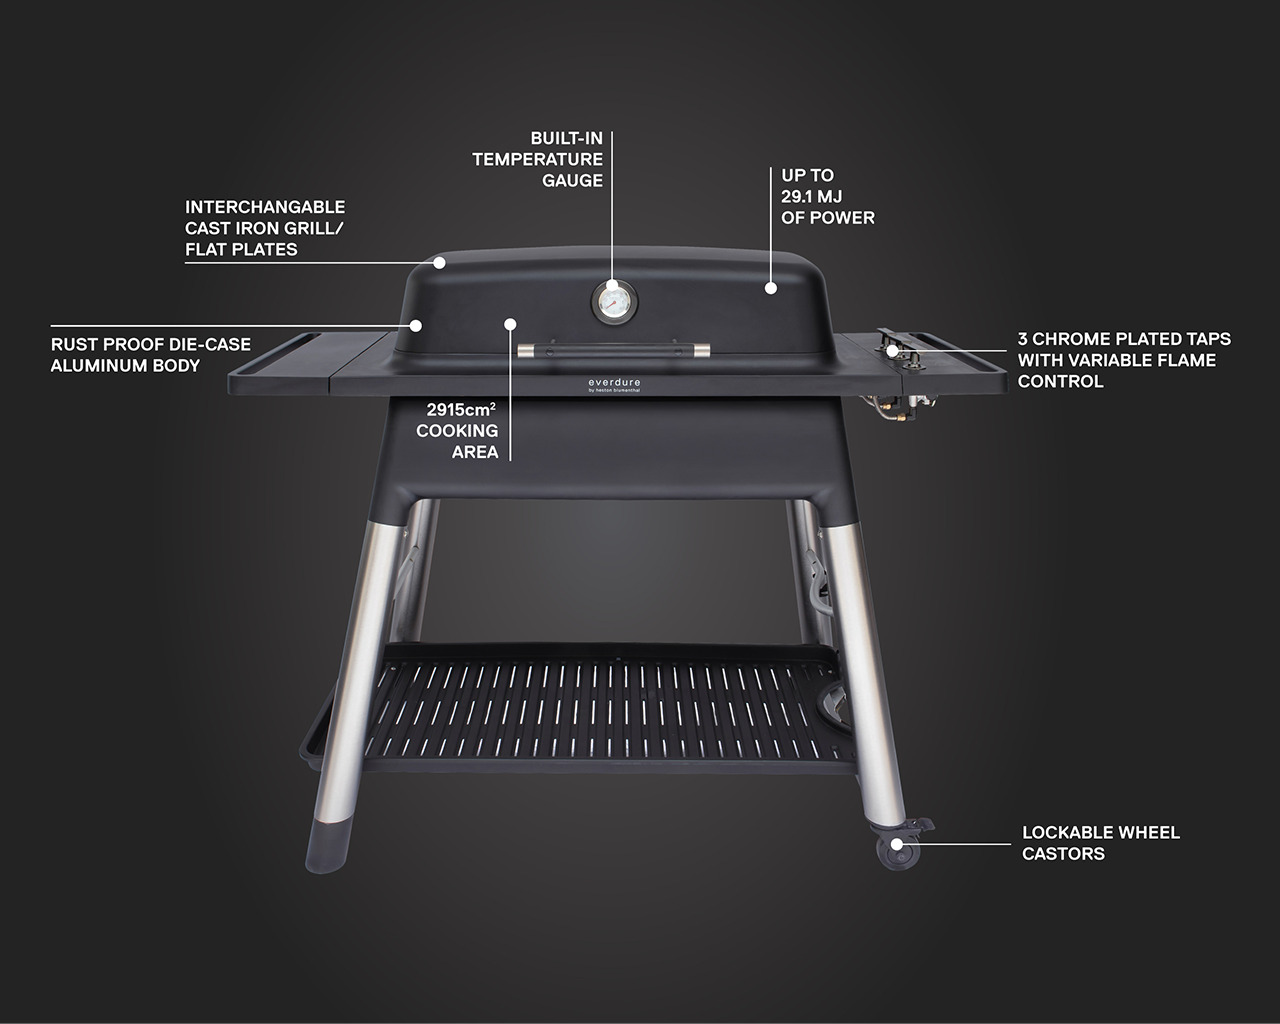 Everdure by Heston Blumenthal FURNACE 3 Burner BBQ with Stand, , hi-res image number null